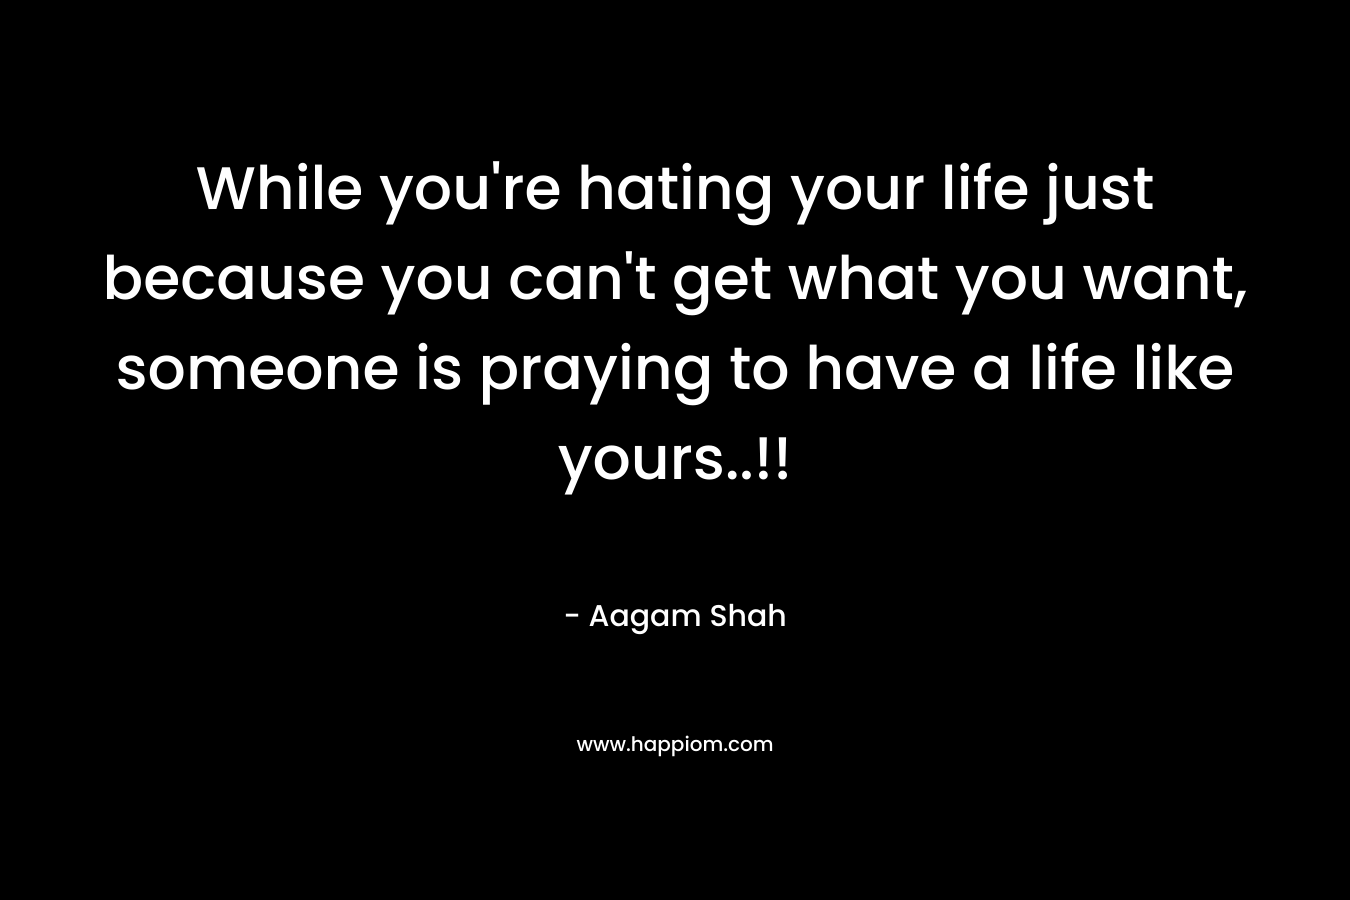 While you're hating your life just because you can't get what you want, someone is praying to have a life like yours..!!